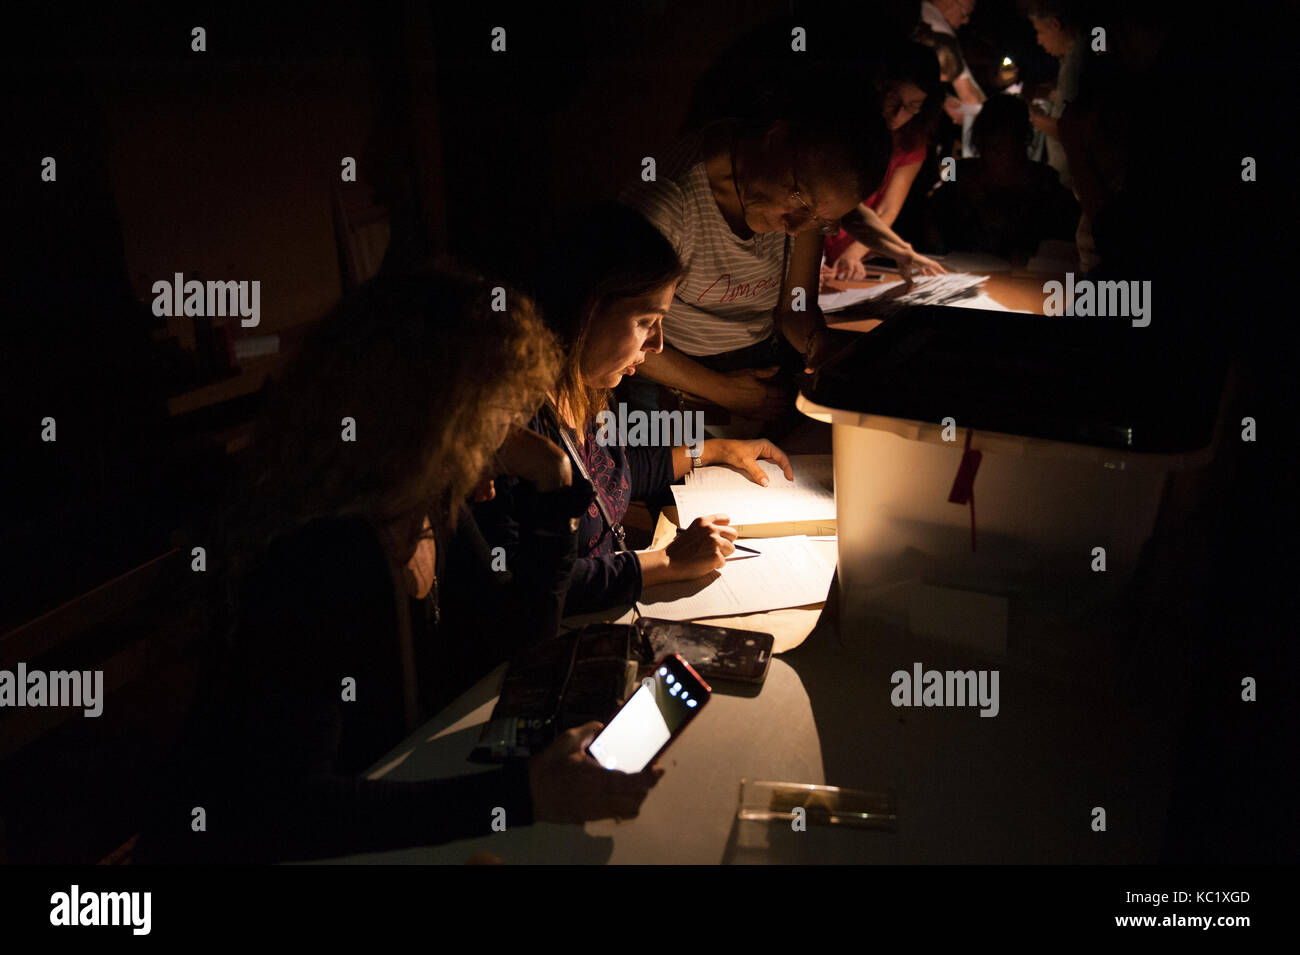 Barcelona, Catalonia. October 1, 2017. During the counting process, the lights have been turned off to make the location of the police more difficult.The vote counting begins, shuffle data of participation of 3,000,000 people. Credit: Charlie Perez/Alamy Live News Stock Photo